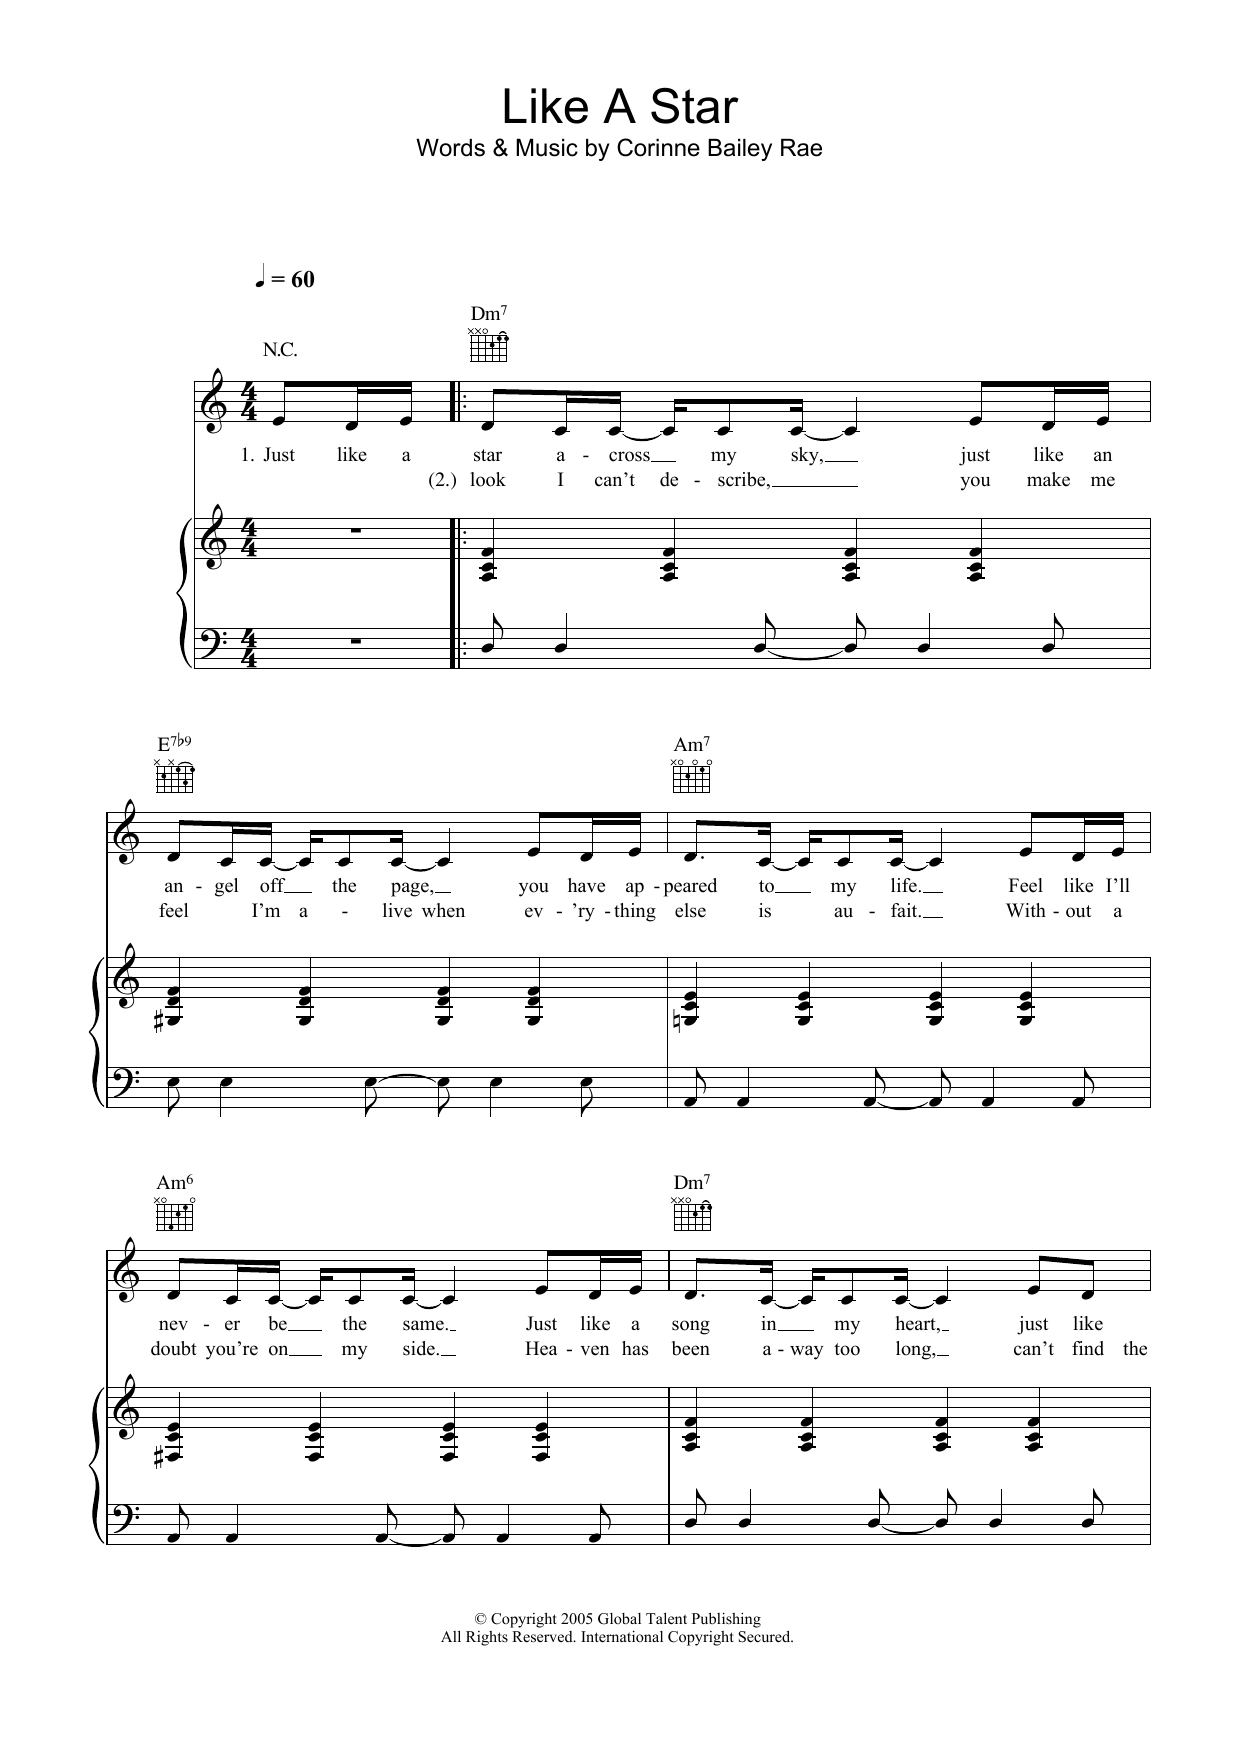 Corinne Bailey Rae Like A Star sheet music notes and chords. Download Printable PDF.